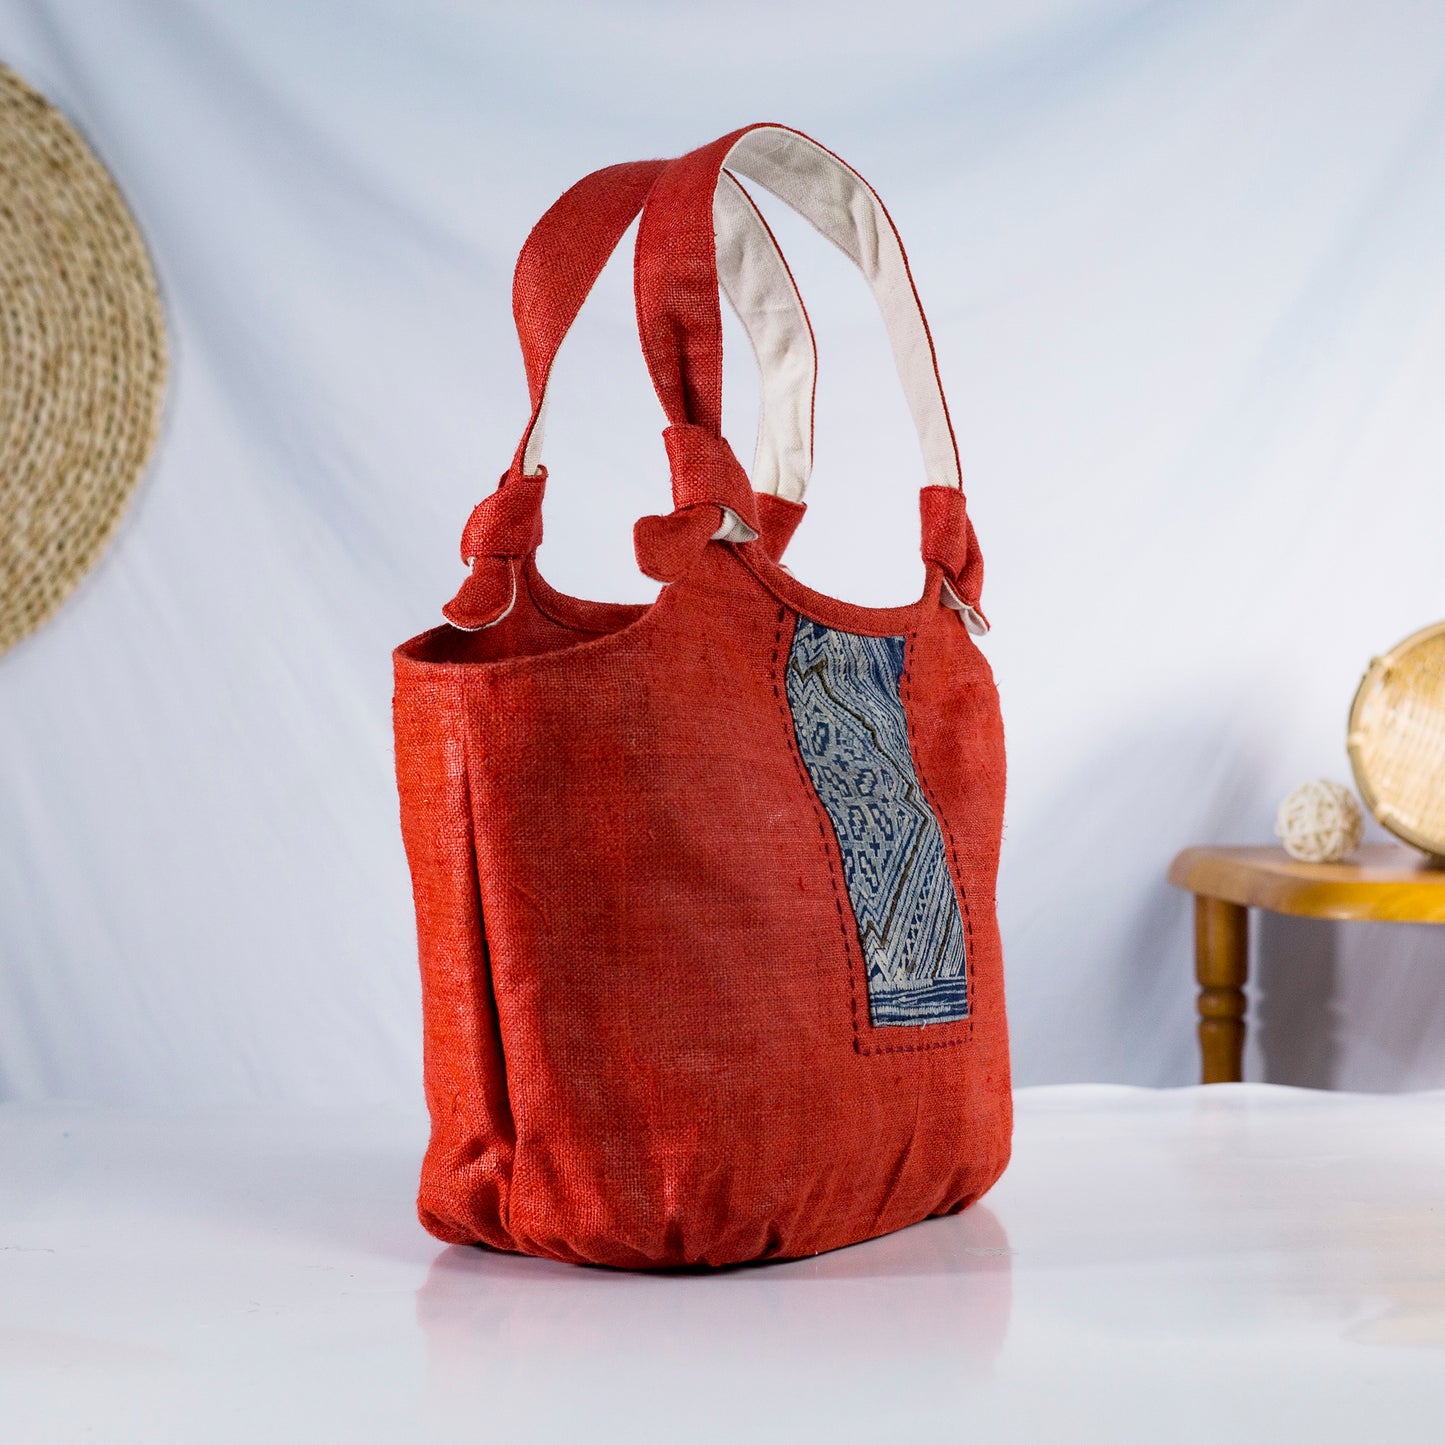 Bunny ear handbag, natural hemp in RED with vintage patch